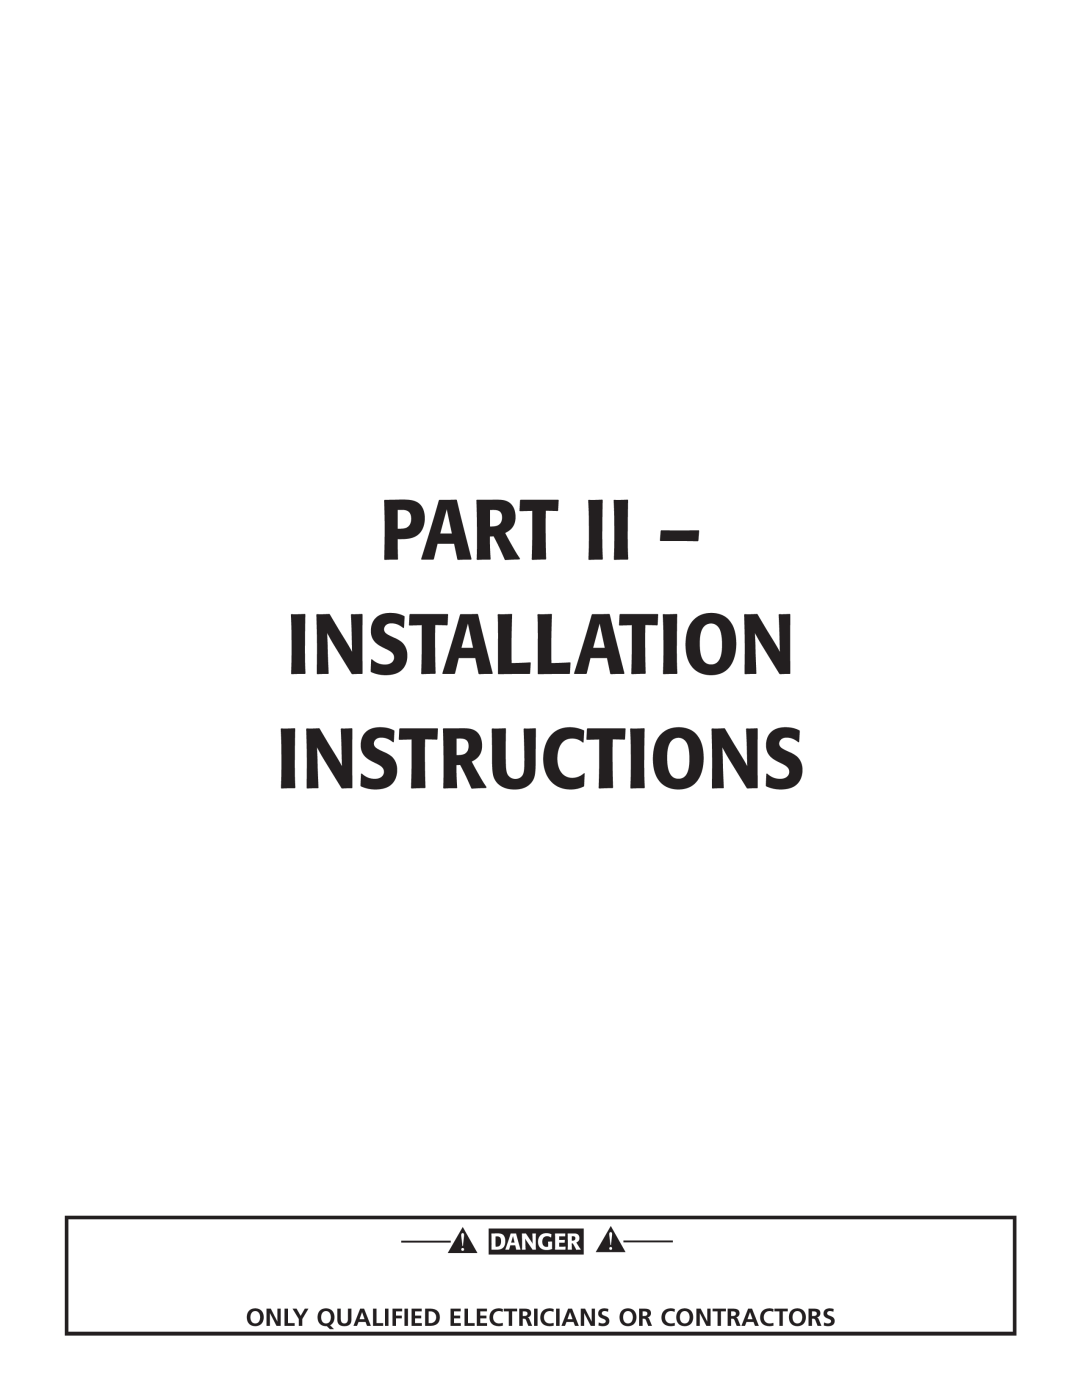 Guardian Technologies 004701-0 Part II – Installation Instructions, Only qualified electricians or contractors, danger 